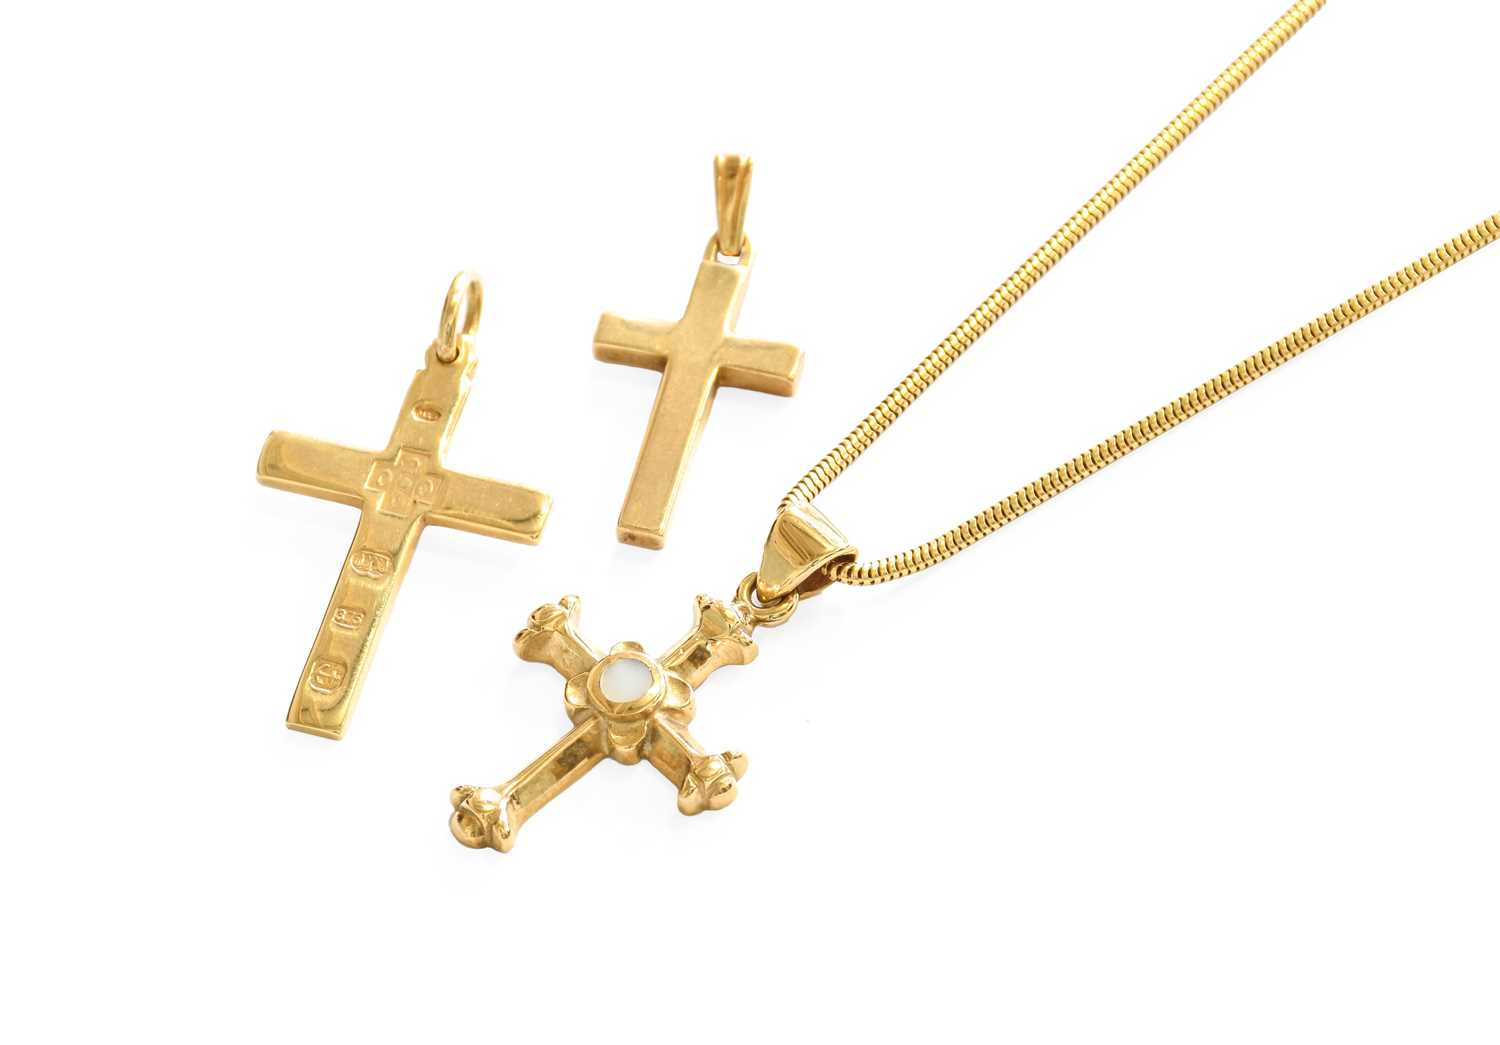 A 9 Carat Gold Mother-of-Pearl Cross Pendant on Chain, pendant length 3.0cm, chain length 46; and